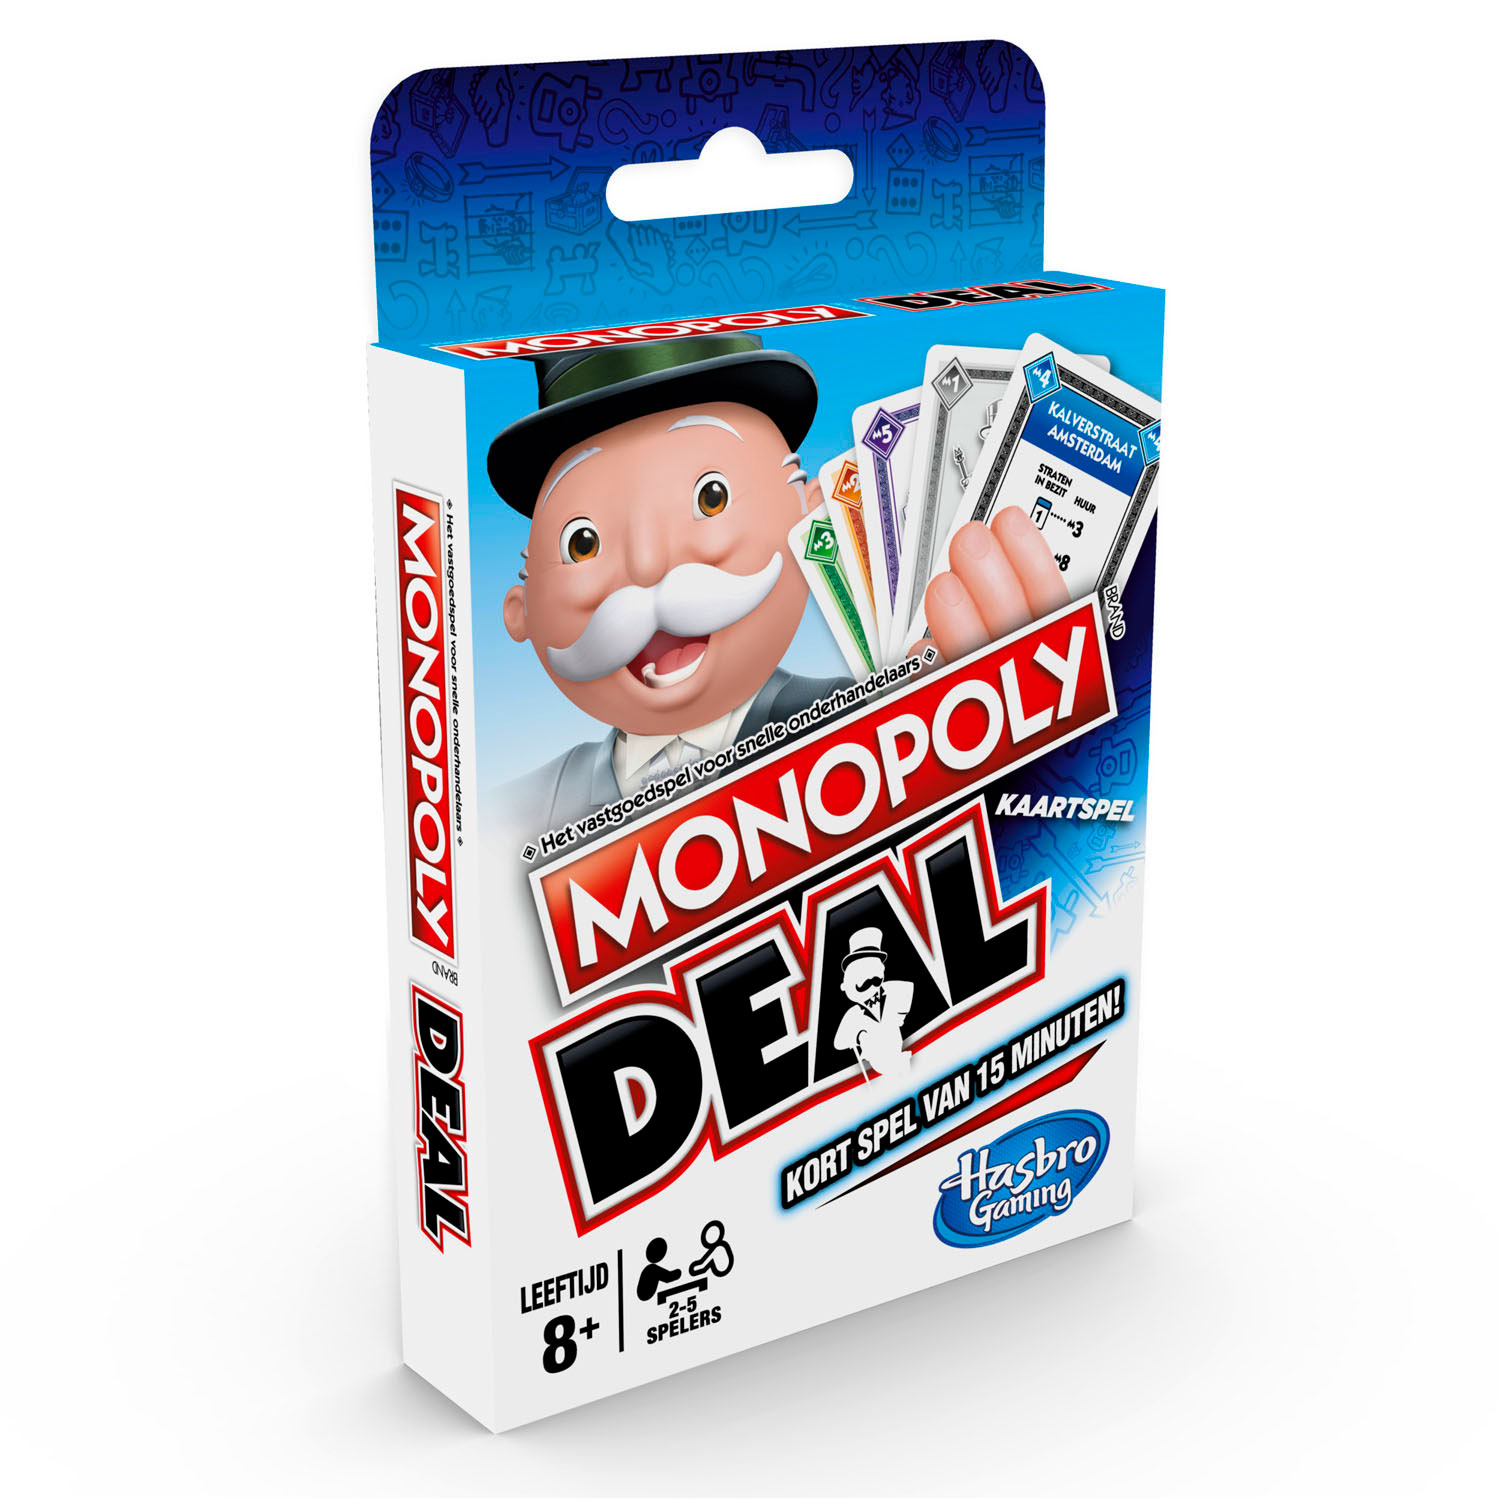 play monopoly deal online free